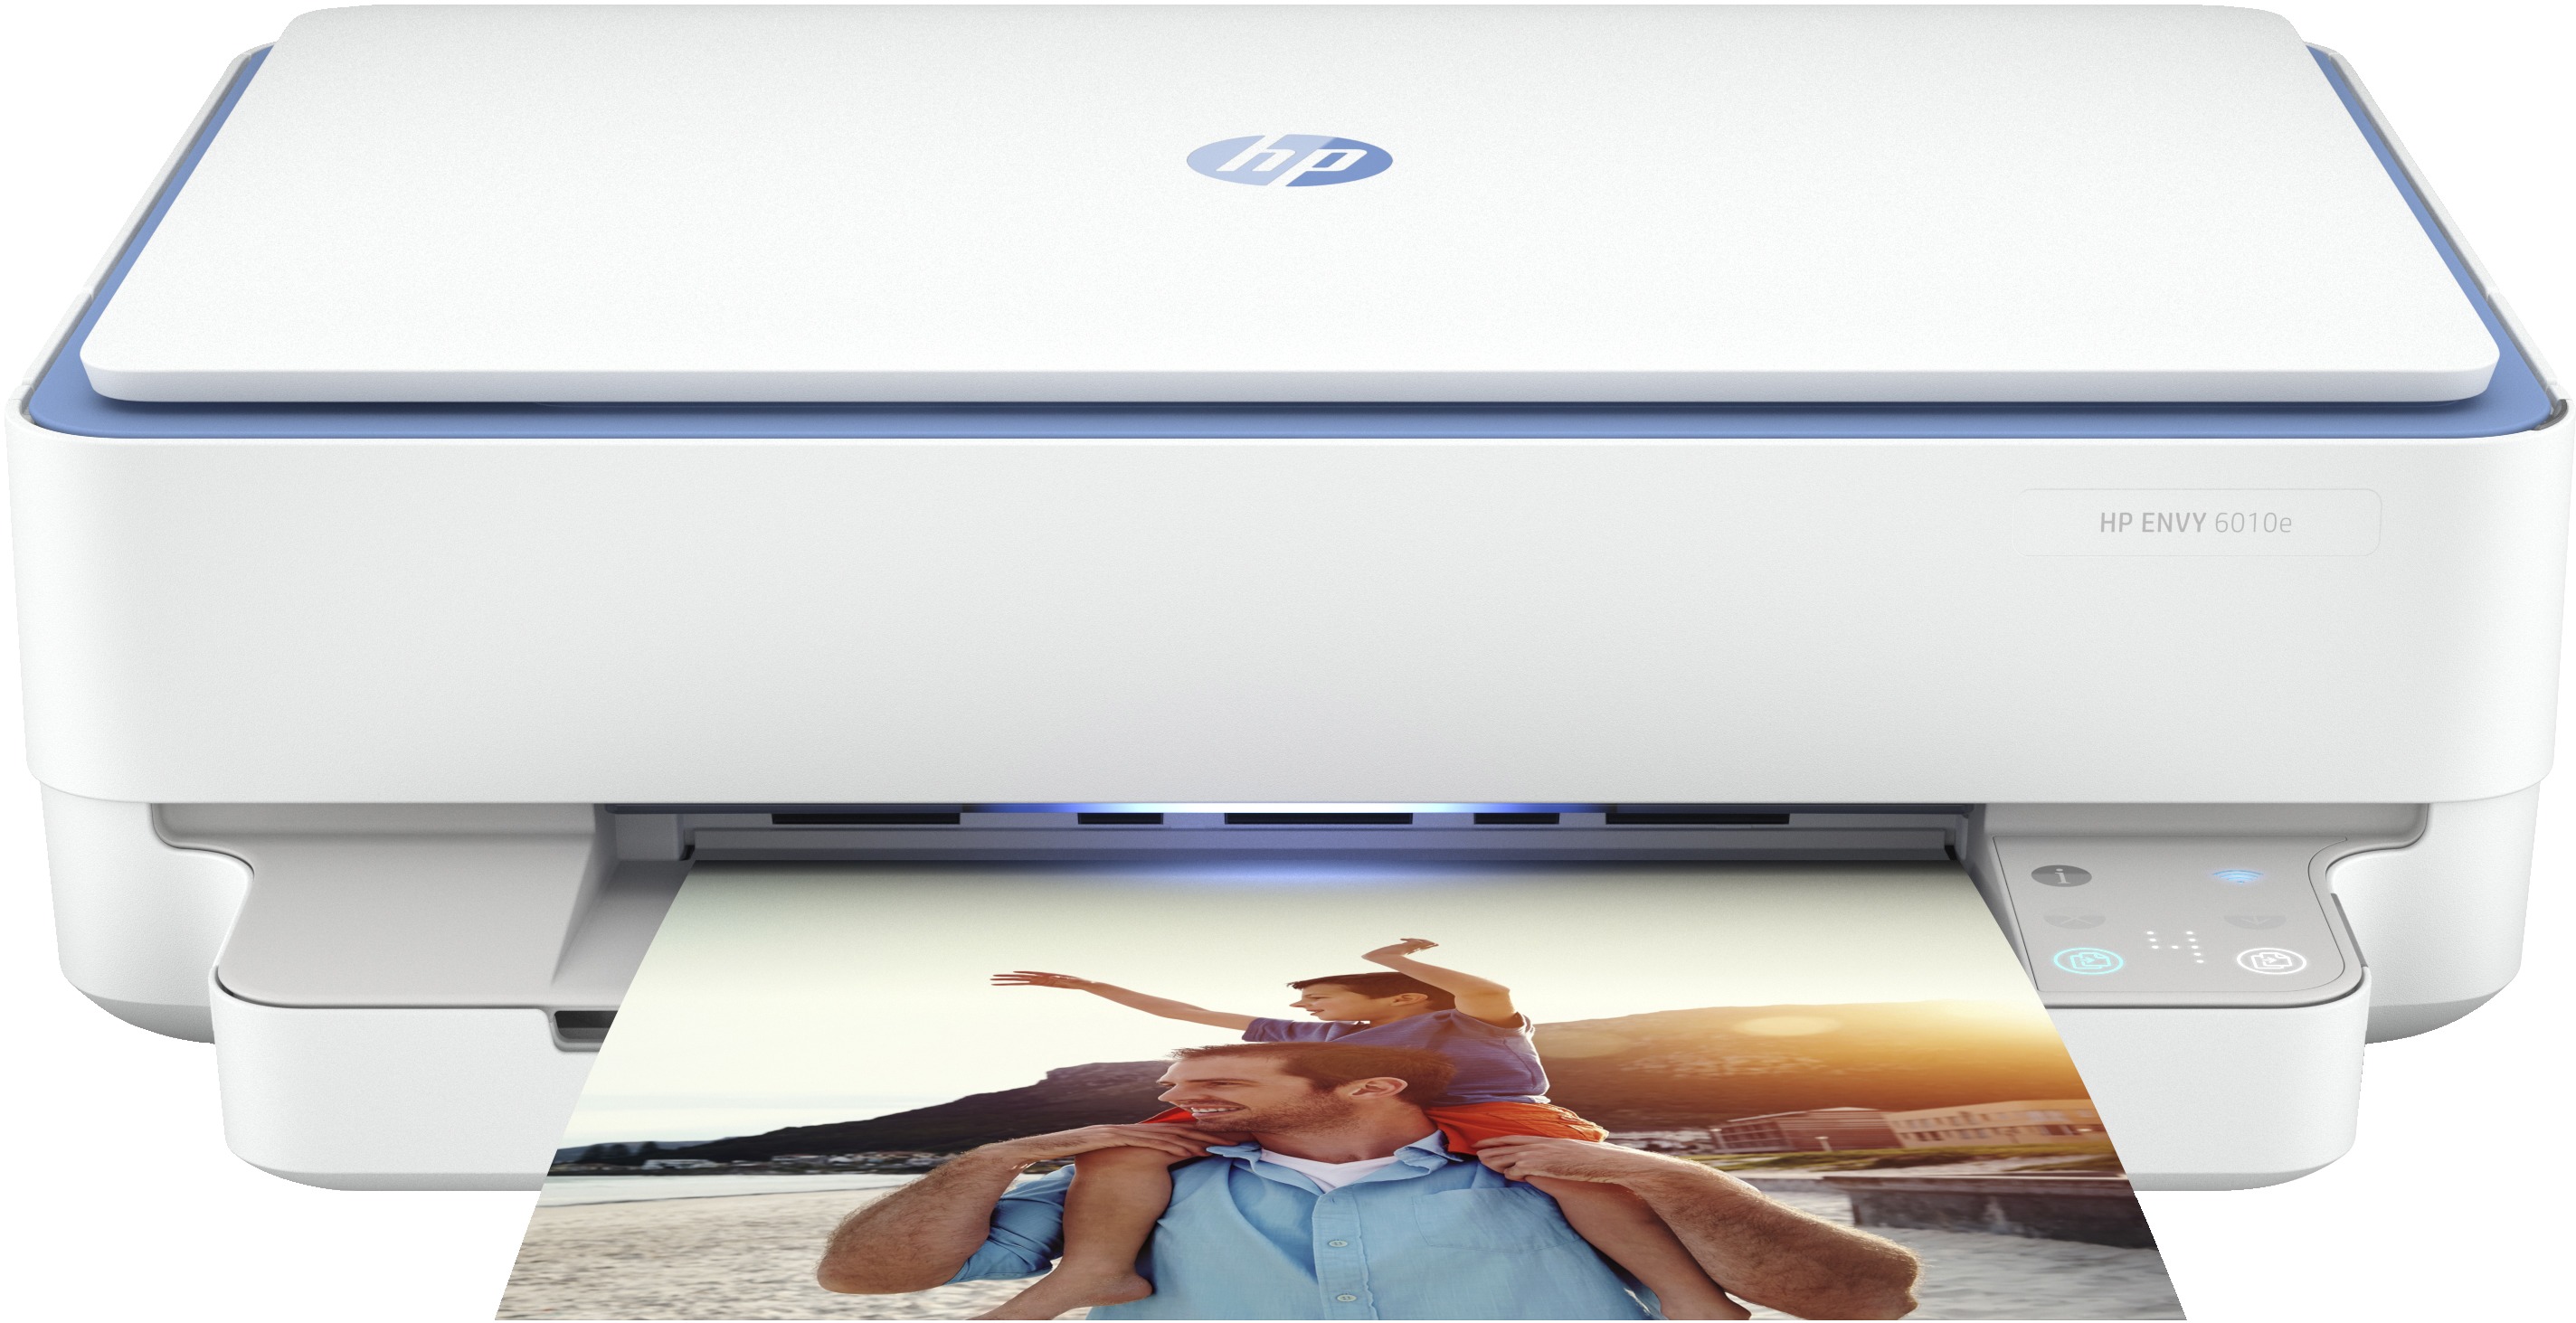 HP all-in-one printer ENVY 6010